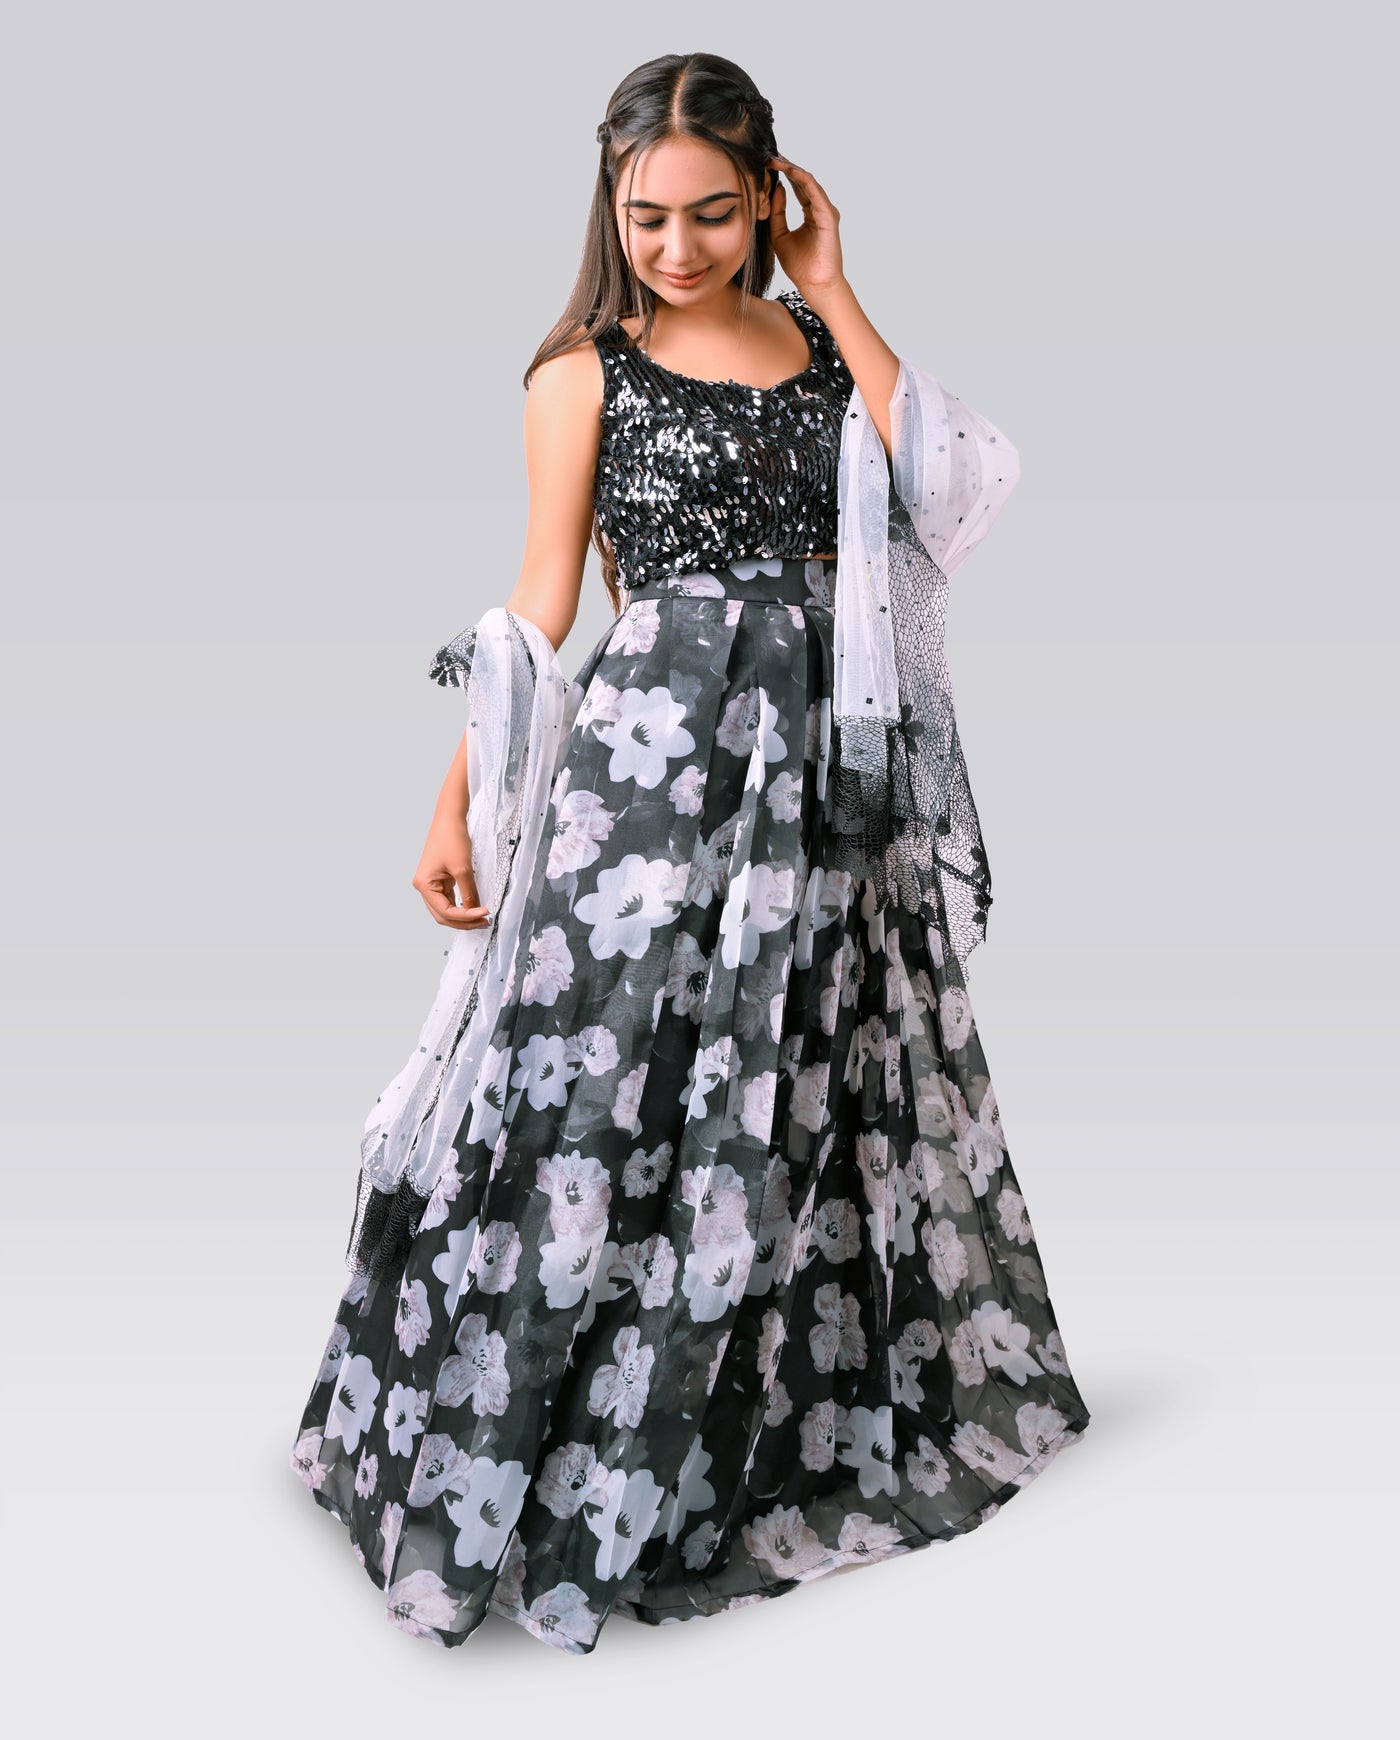 Midnight Bloom Lehenga - Indian Clothing in Denver, CO, Aurora, CO, Boulder, CO, Fort Collins, CO, Colorado Springs, CO, Parker, CO, Highlands Ranch, CO, Cherry Creek, CO, Centennial, CO, and Longmont, CO. Nationwide shipping USA - India Fashion X